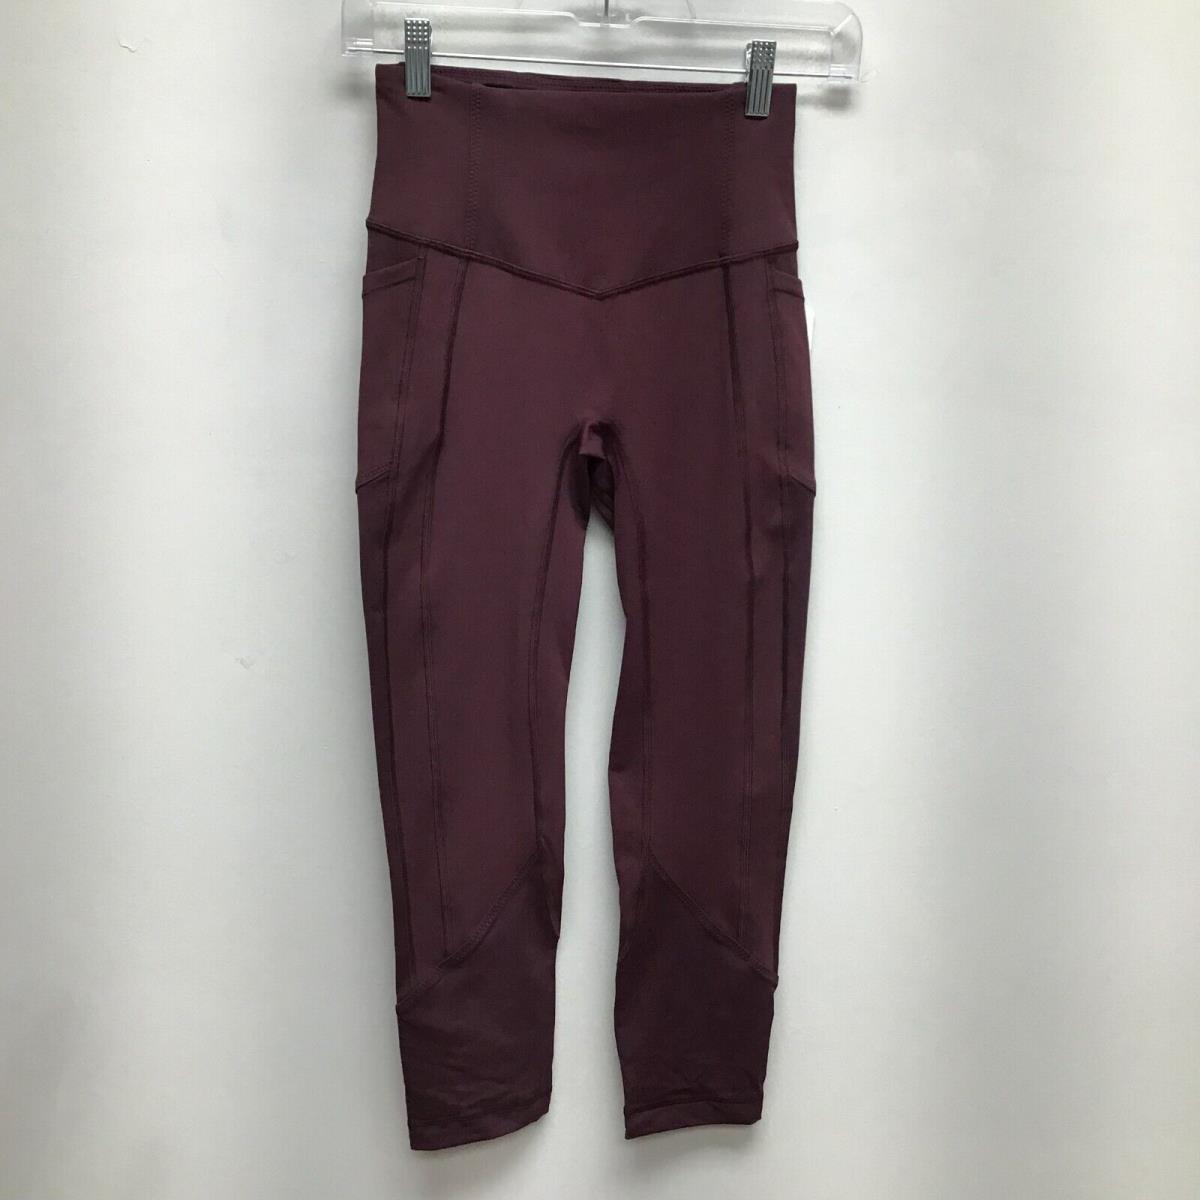 Lululemon Brdr Bordeaux Drama High Rise All The Right Places Crop II Leggings 4